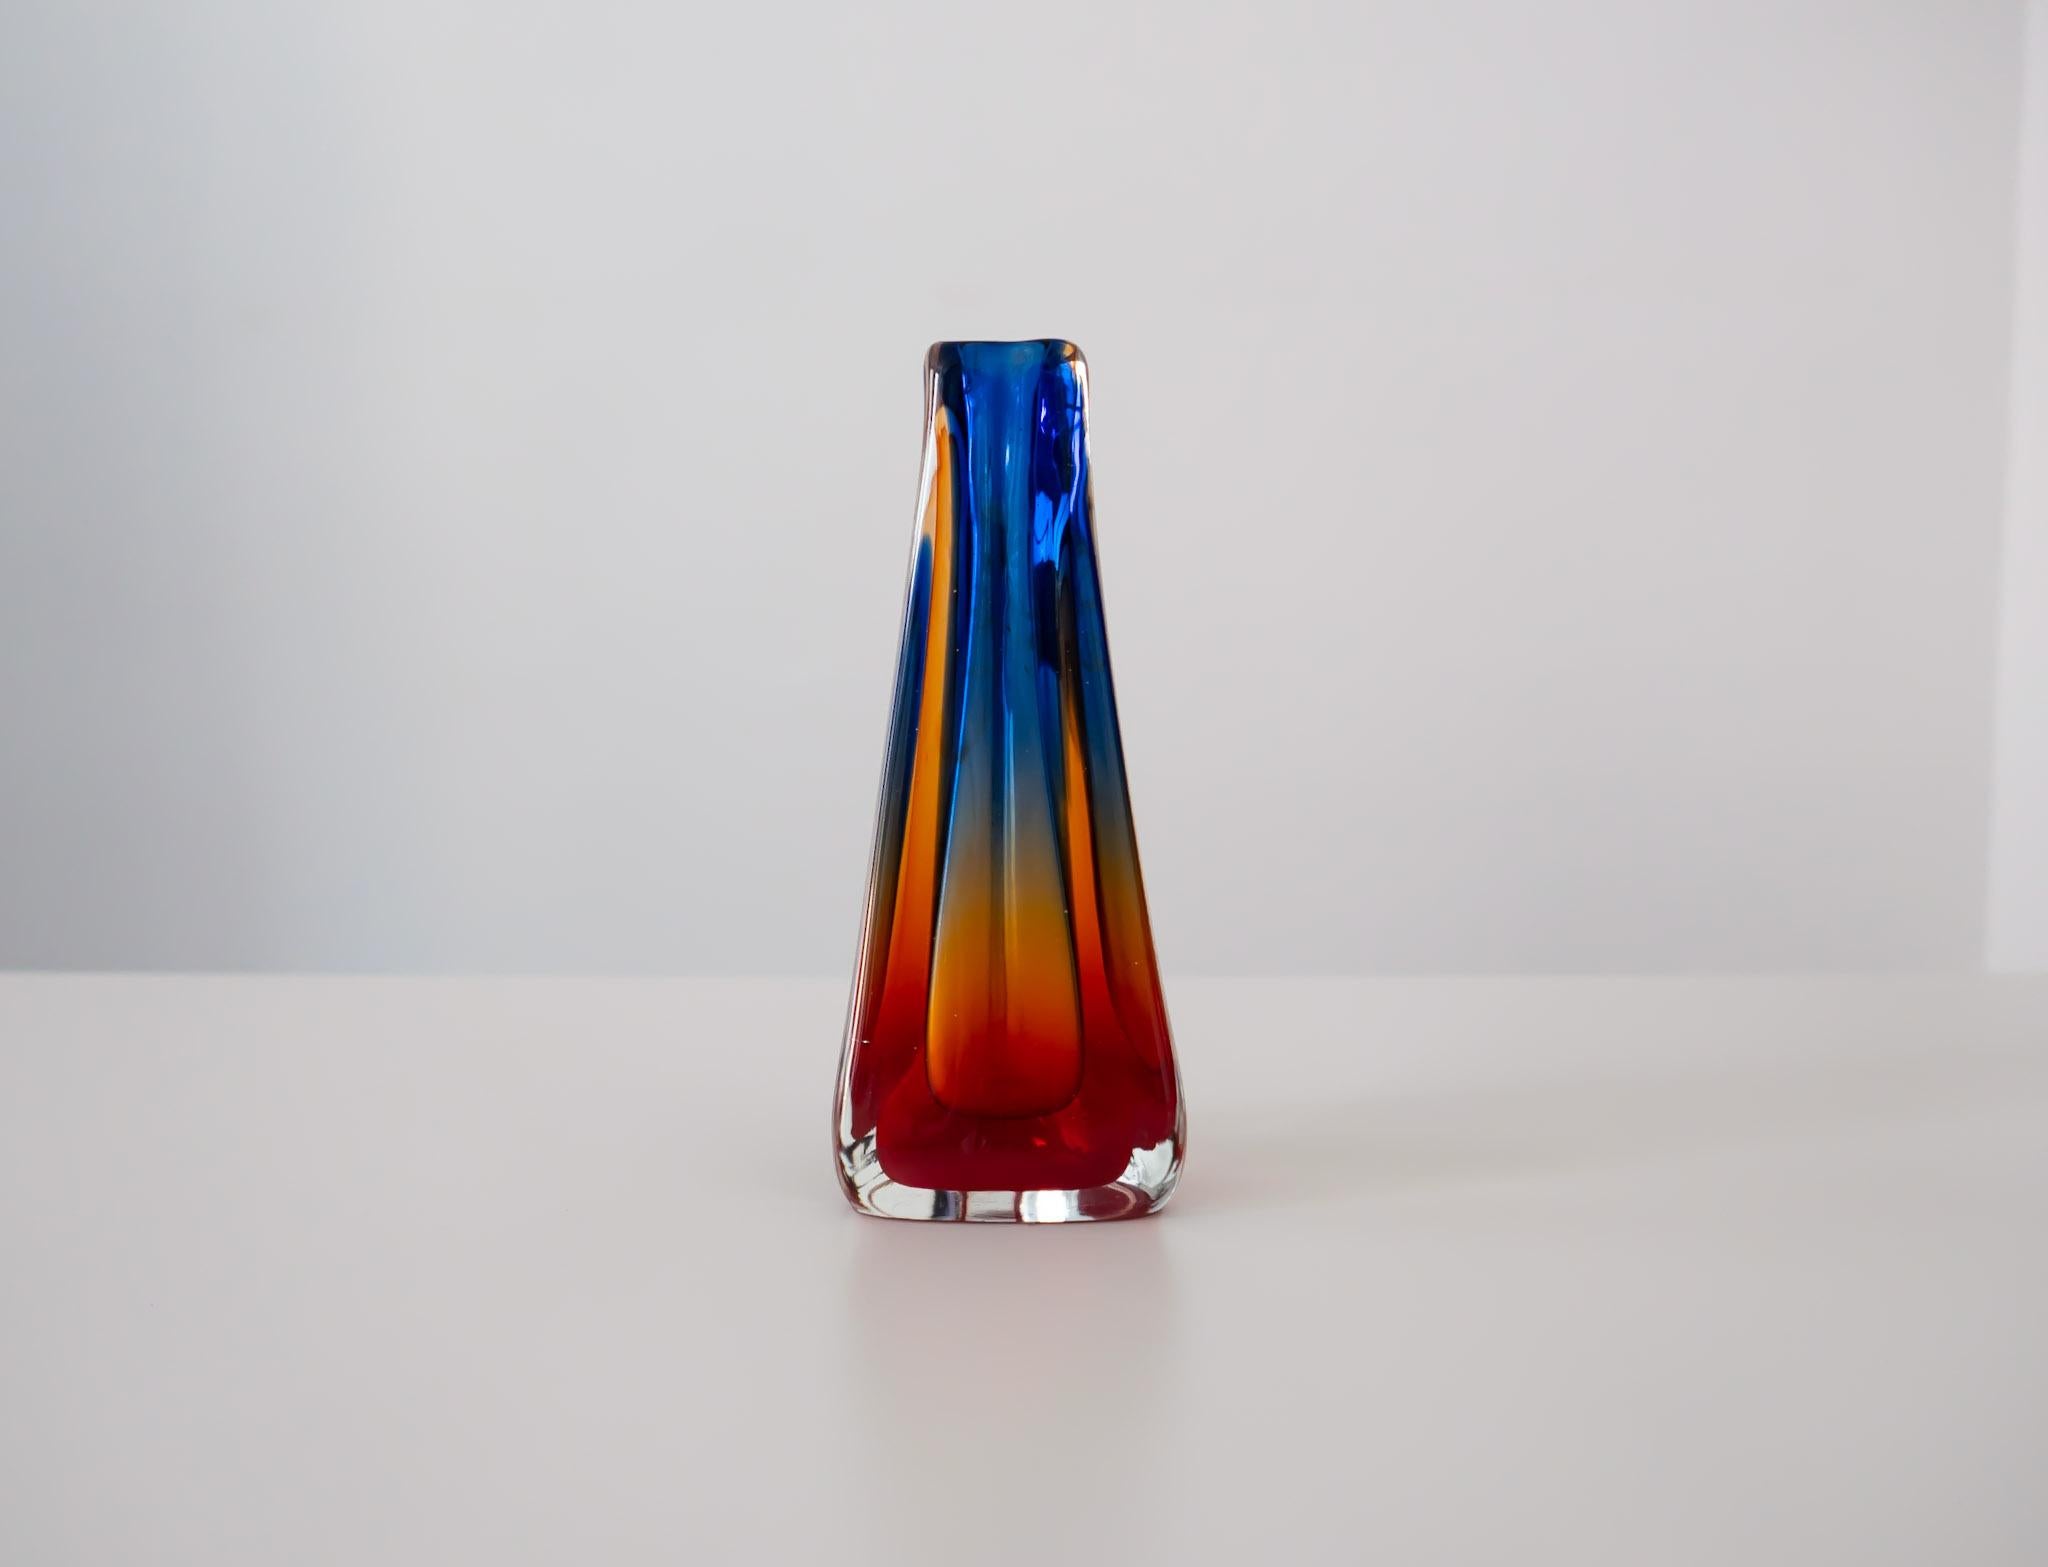 Hand-Crafted Colorful Murano Glass Sommerso Vase for Maestri Muranesi, Italy 1960s For Sale